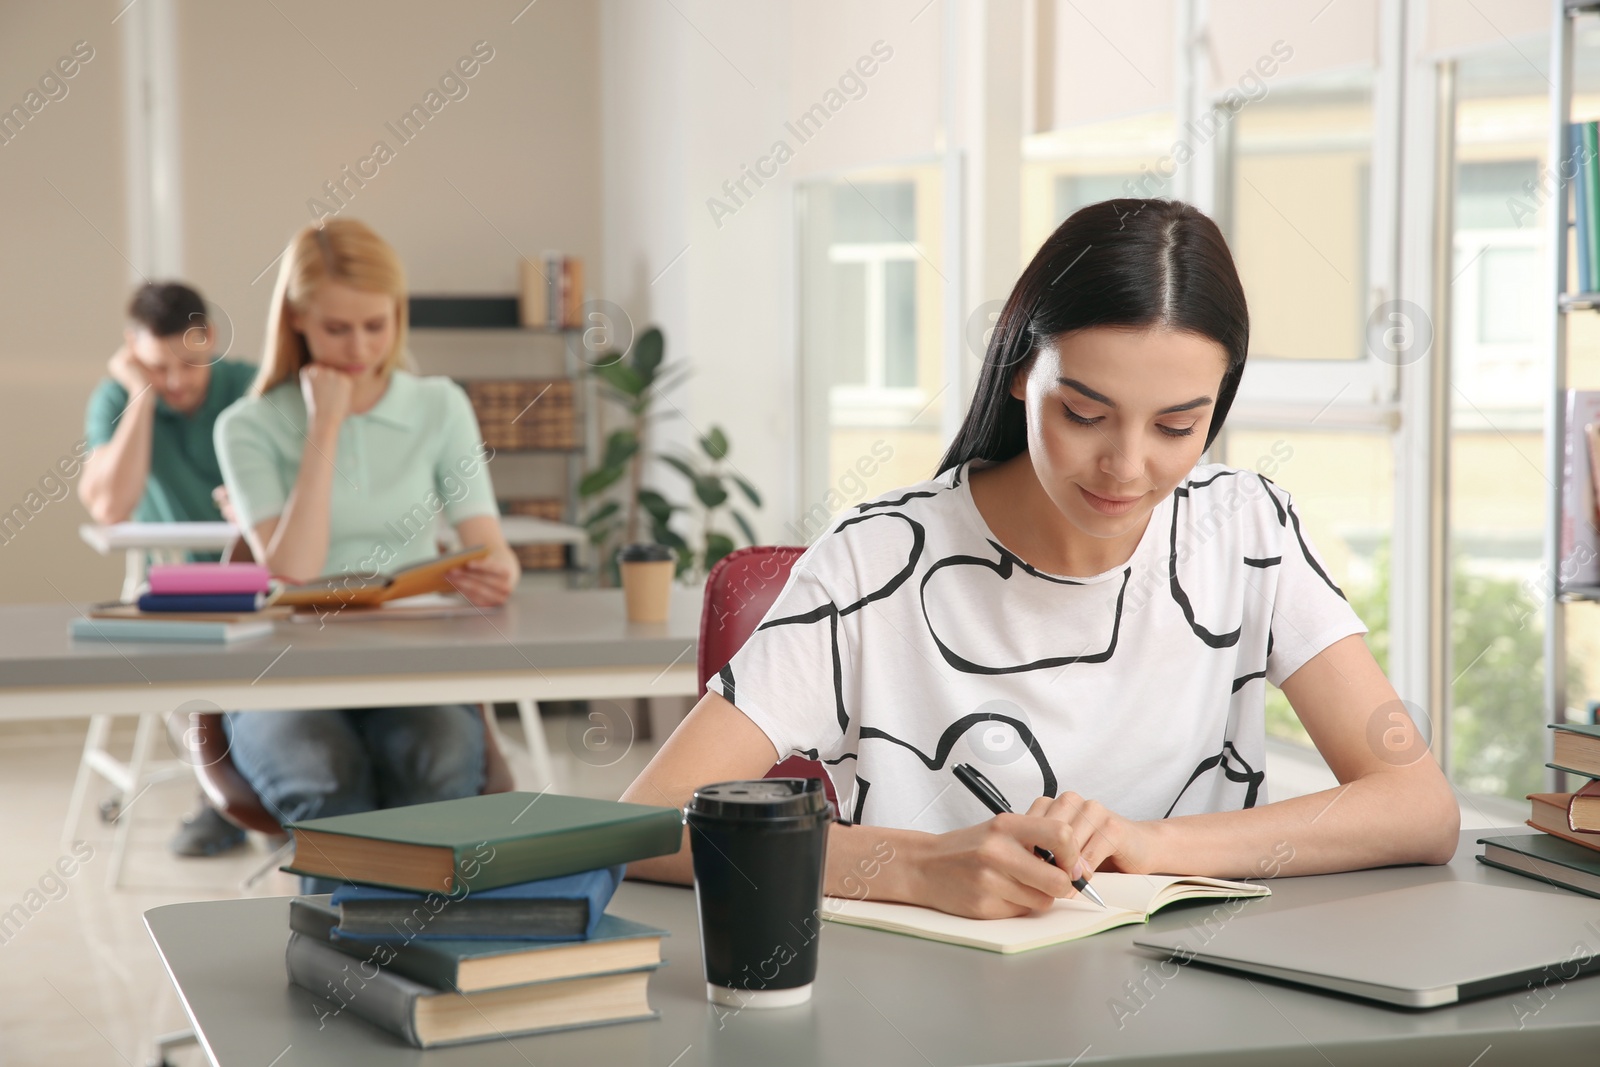 Photo of Young woman studying at table in library